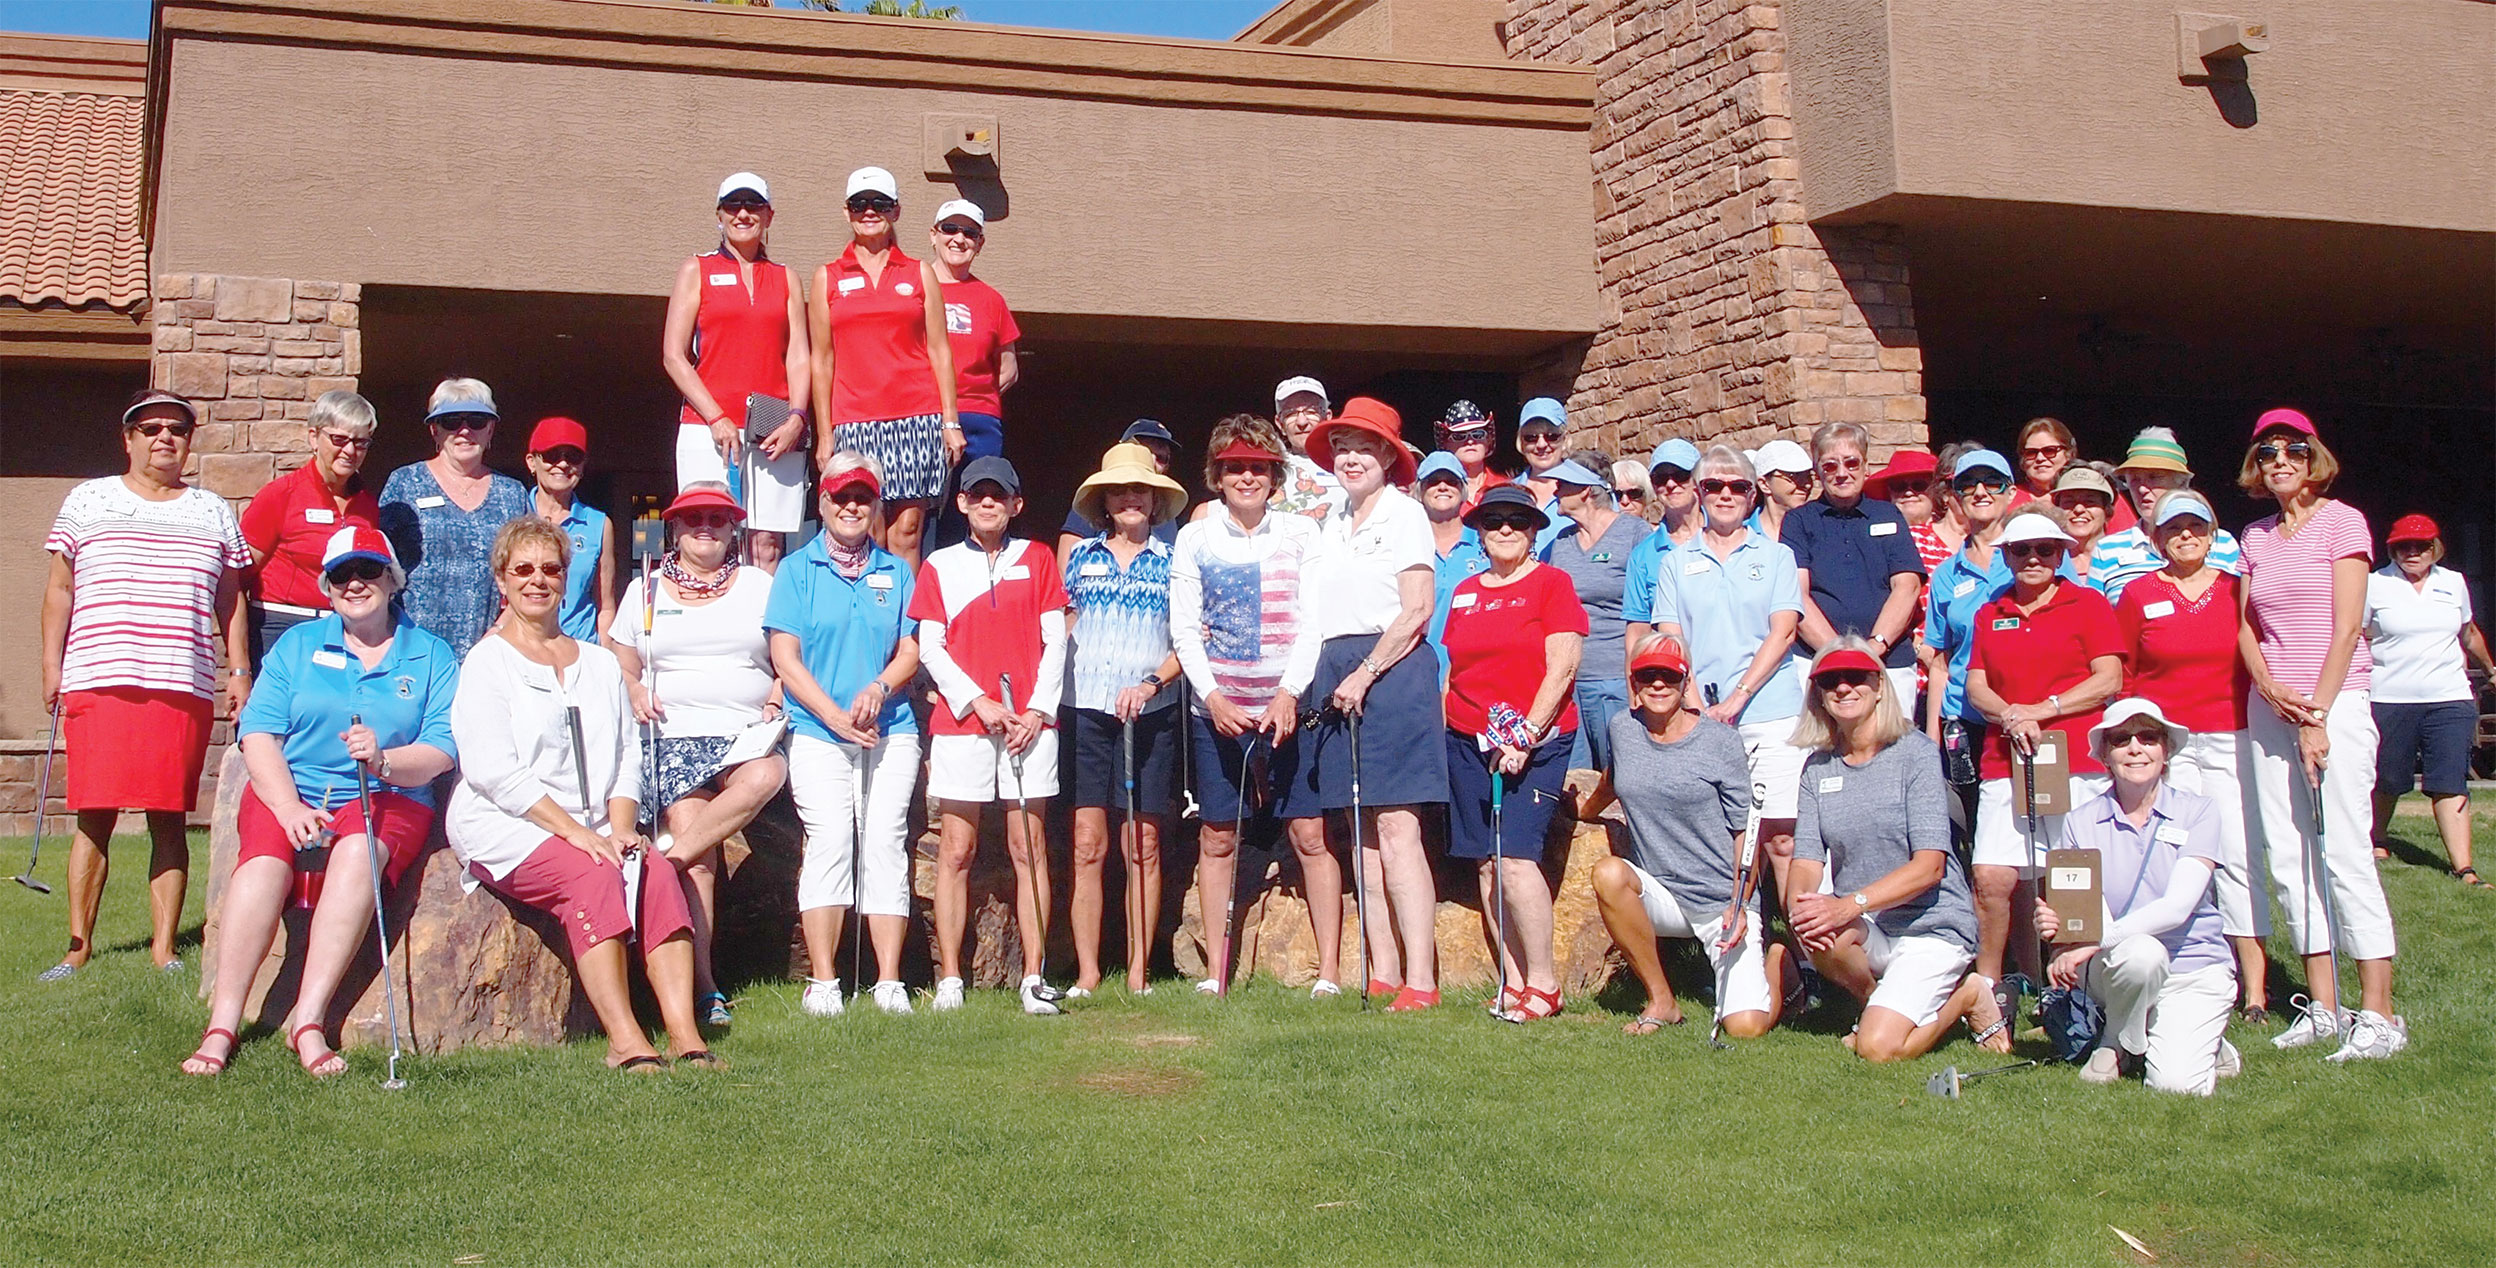 The Lady Putters sported our national colors as they putted just prior to Memorial Day; photo by Sylvia Butler